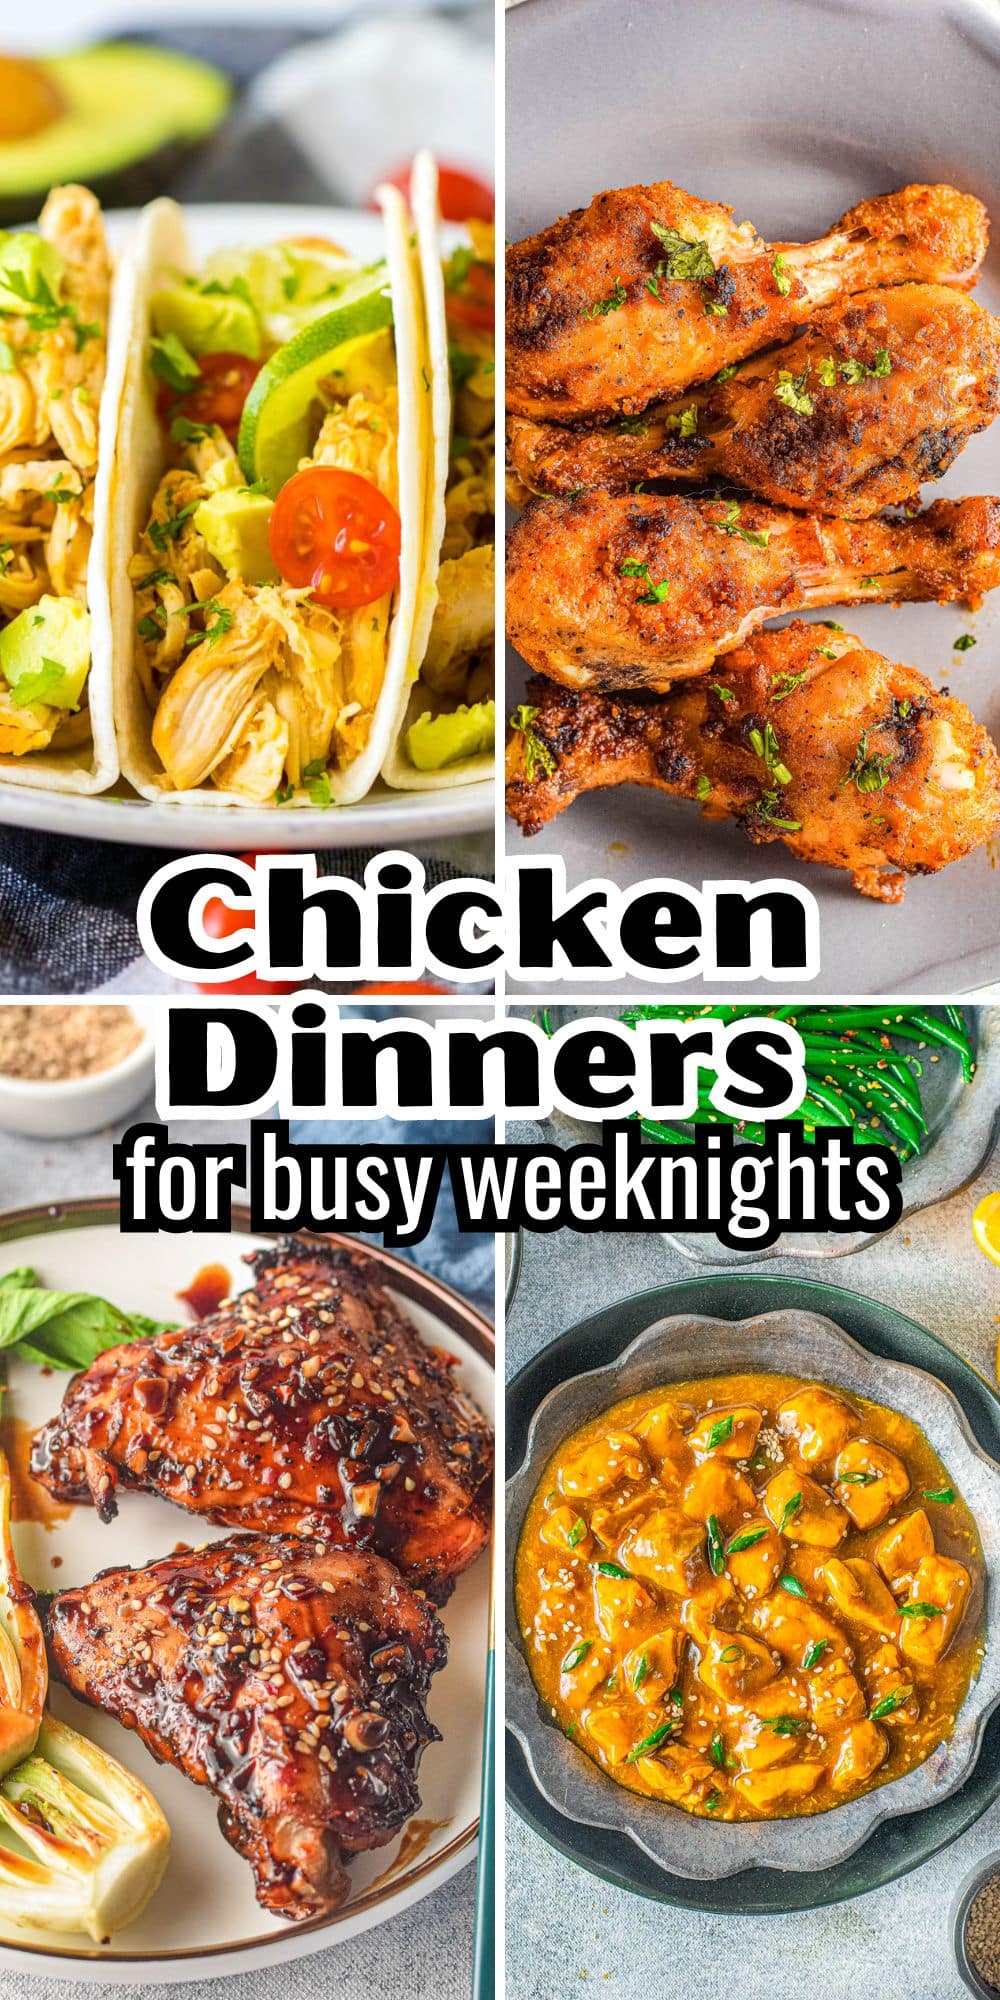 Chicken dinners for busy weeknights.